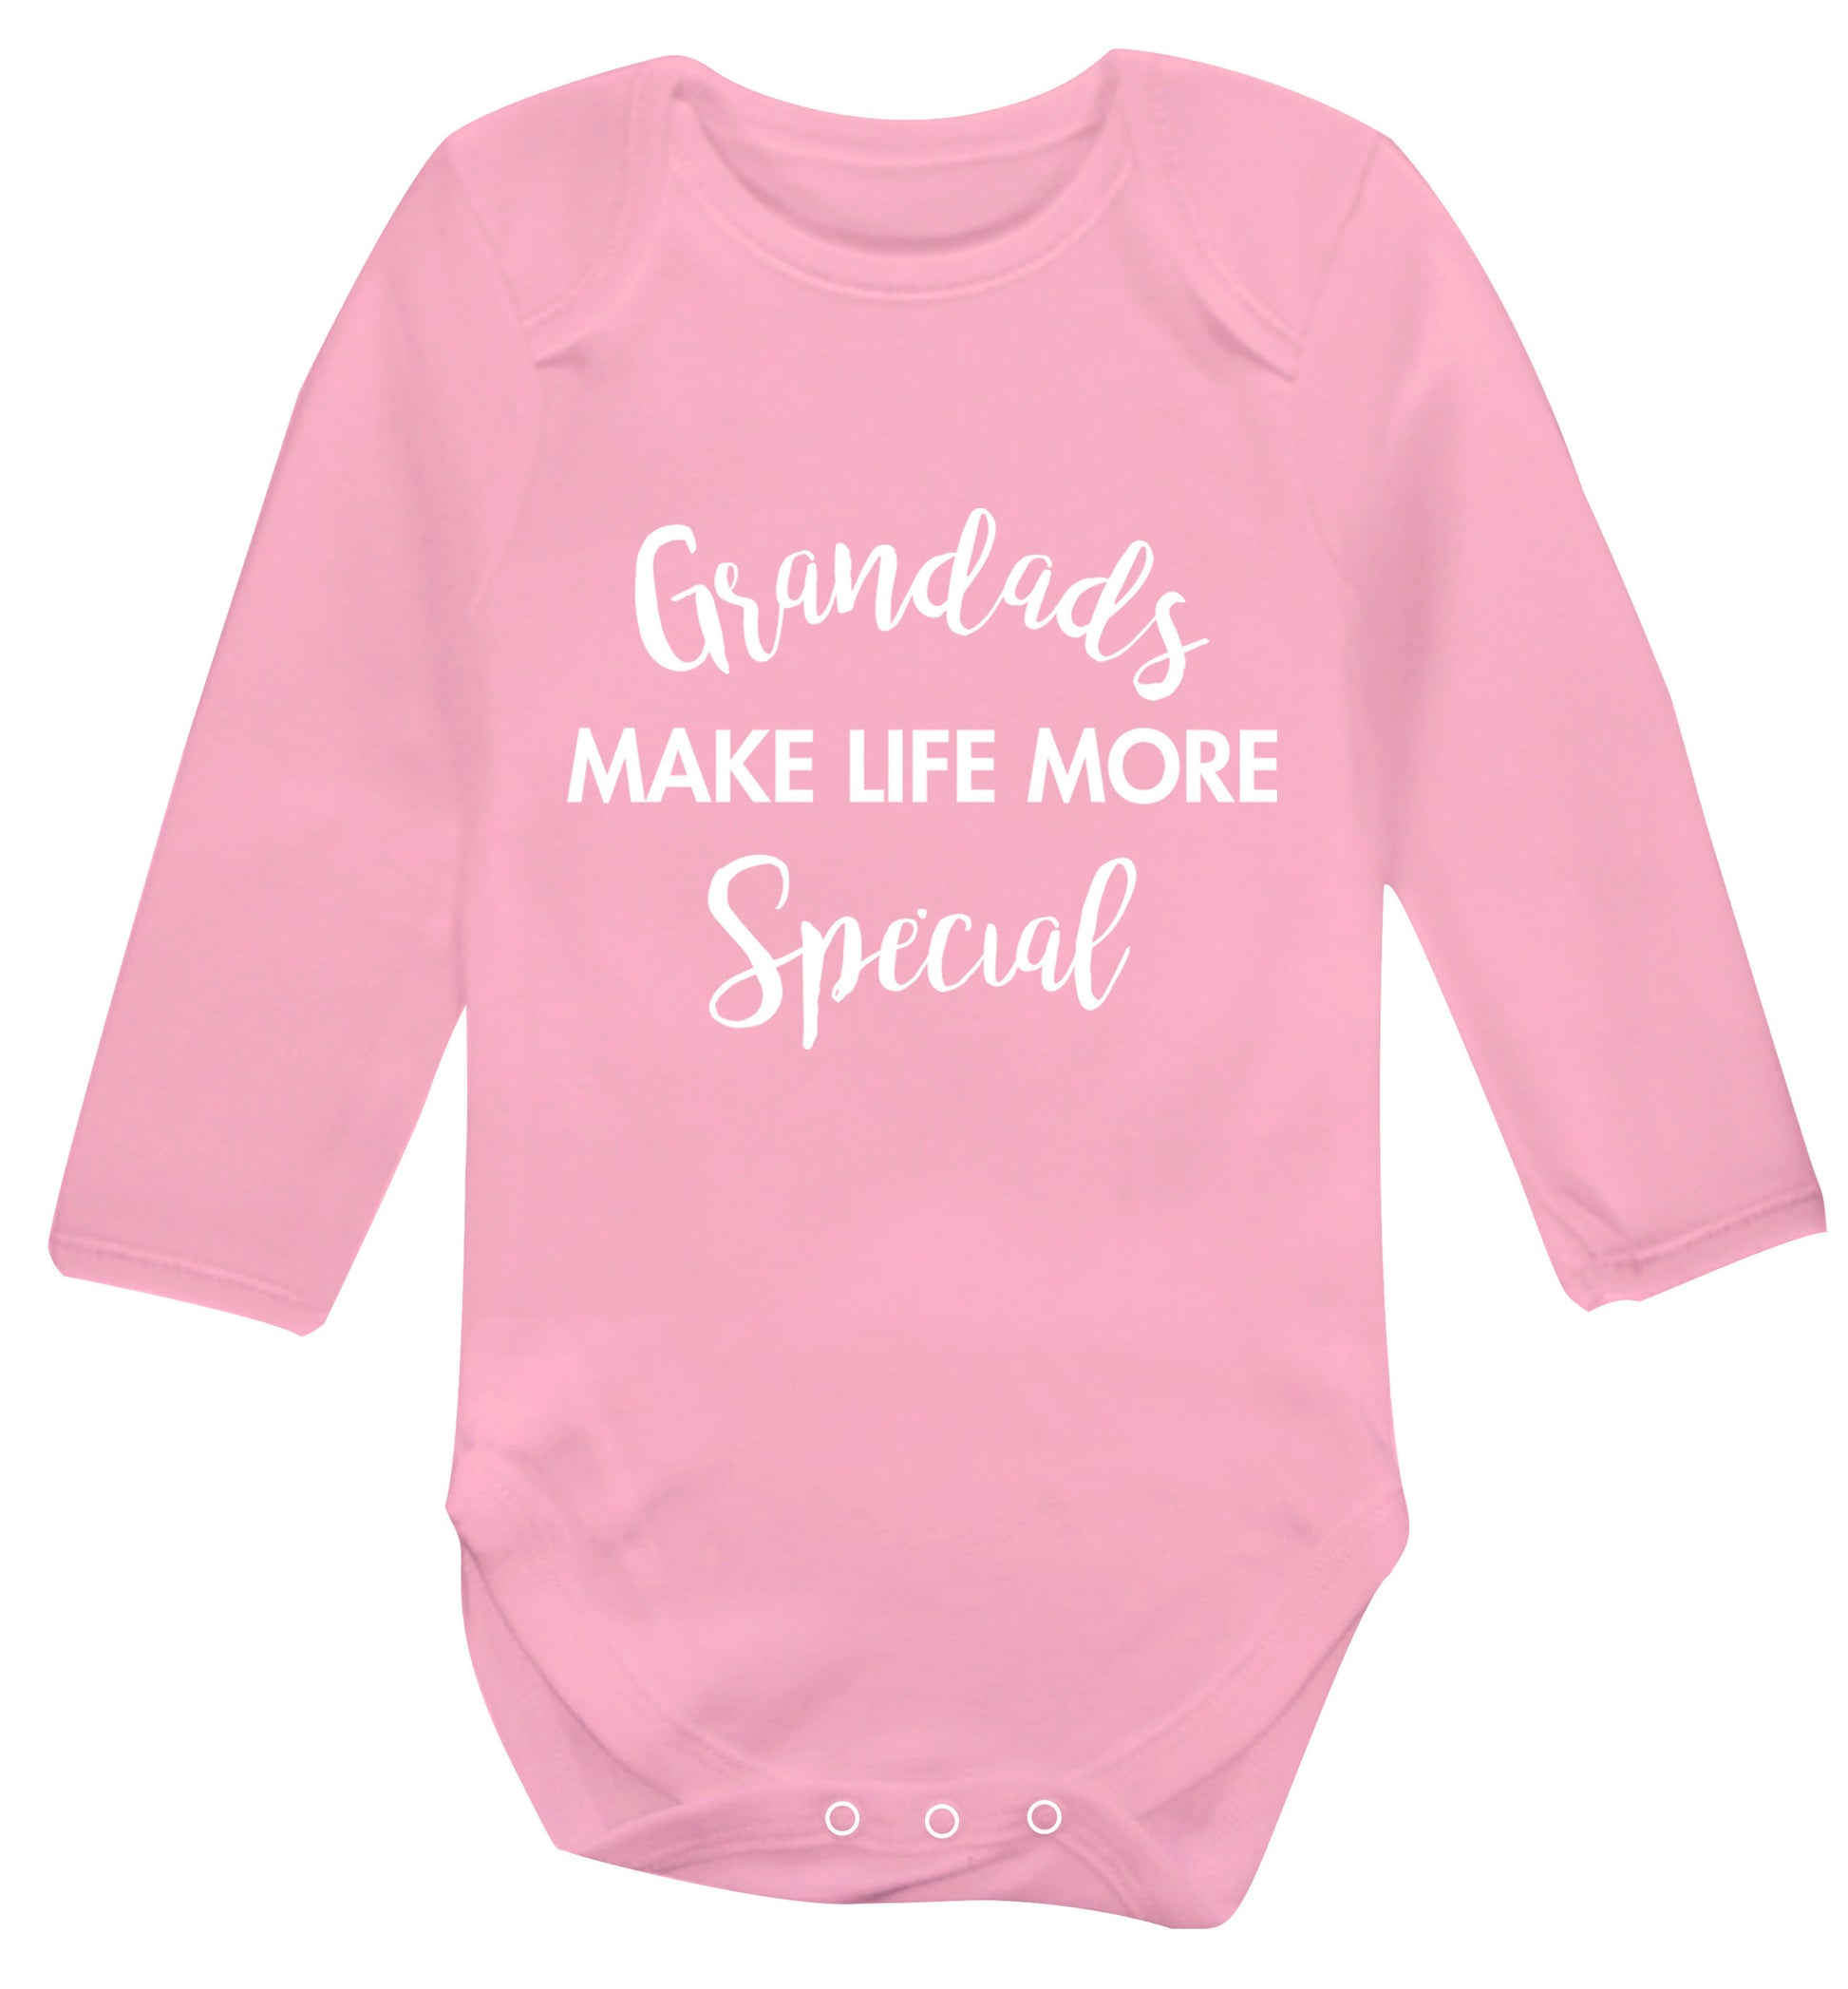 Grandads make life more special Baby Vest long sleeved pale pink 6-12 months